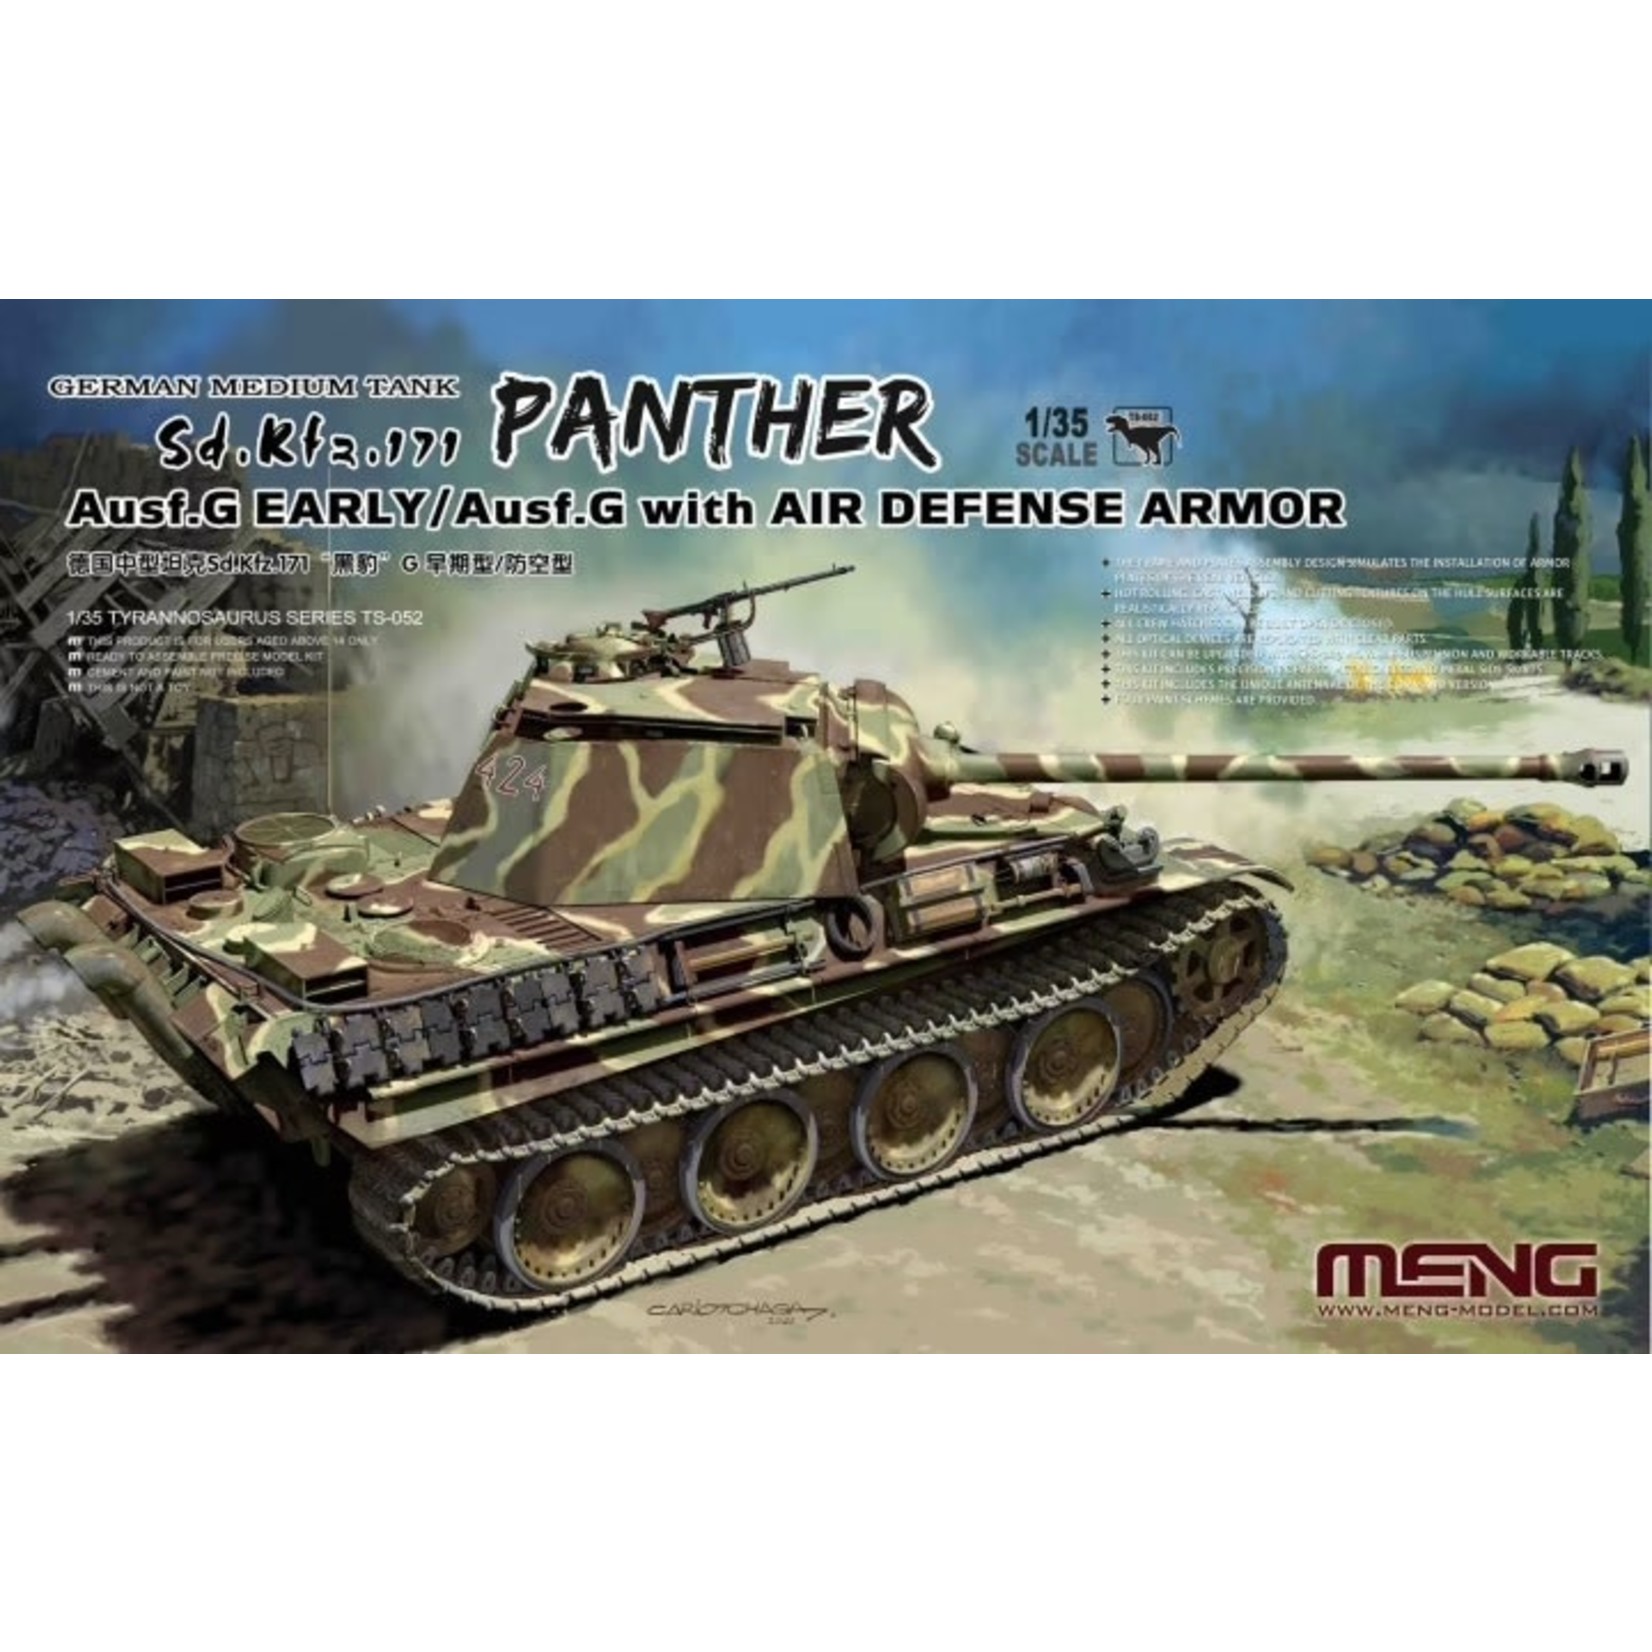 MENG MENGTS052 Sd.Kfz.171 Panther Ausf.G Early with Air Defense Armour (1/35)